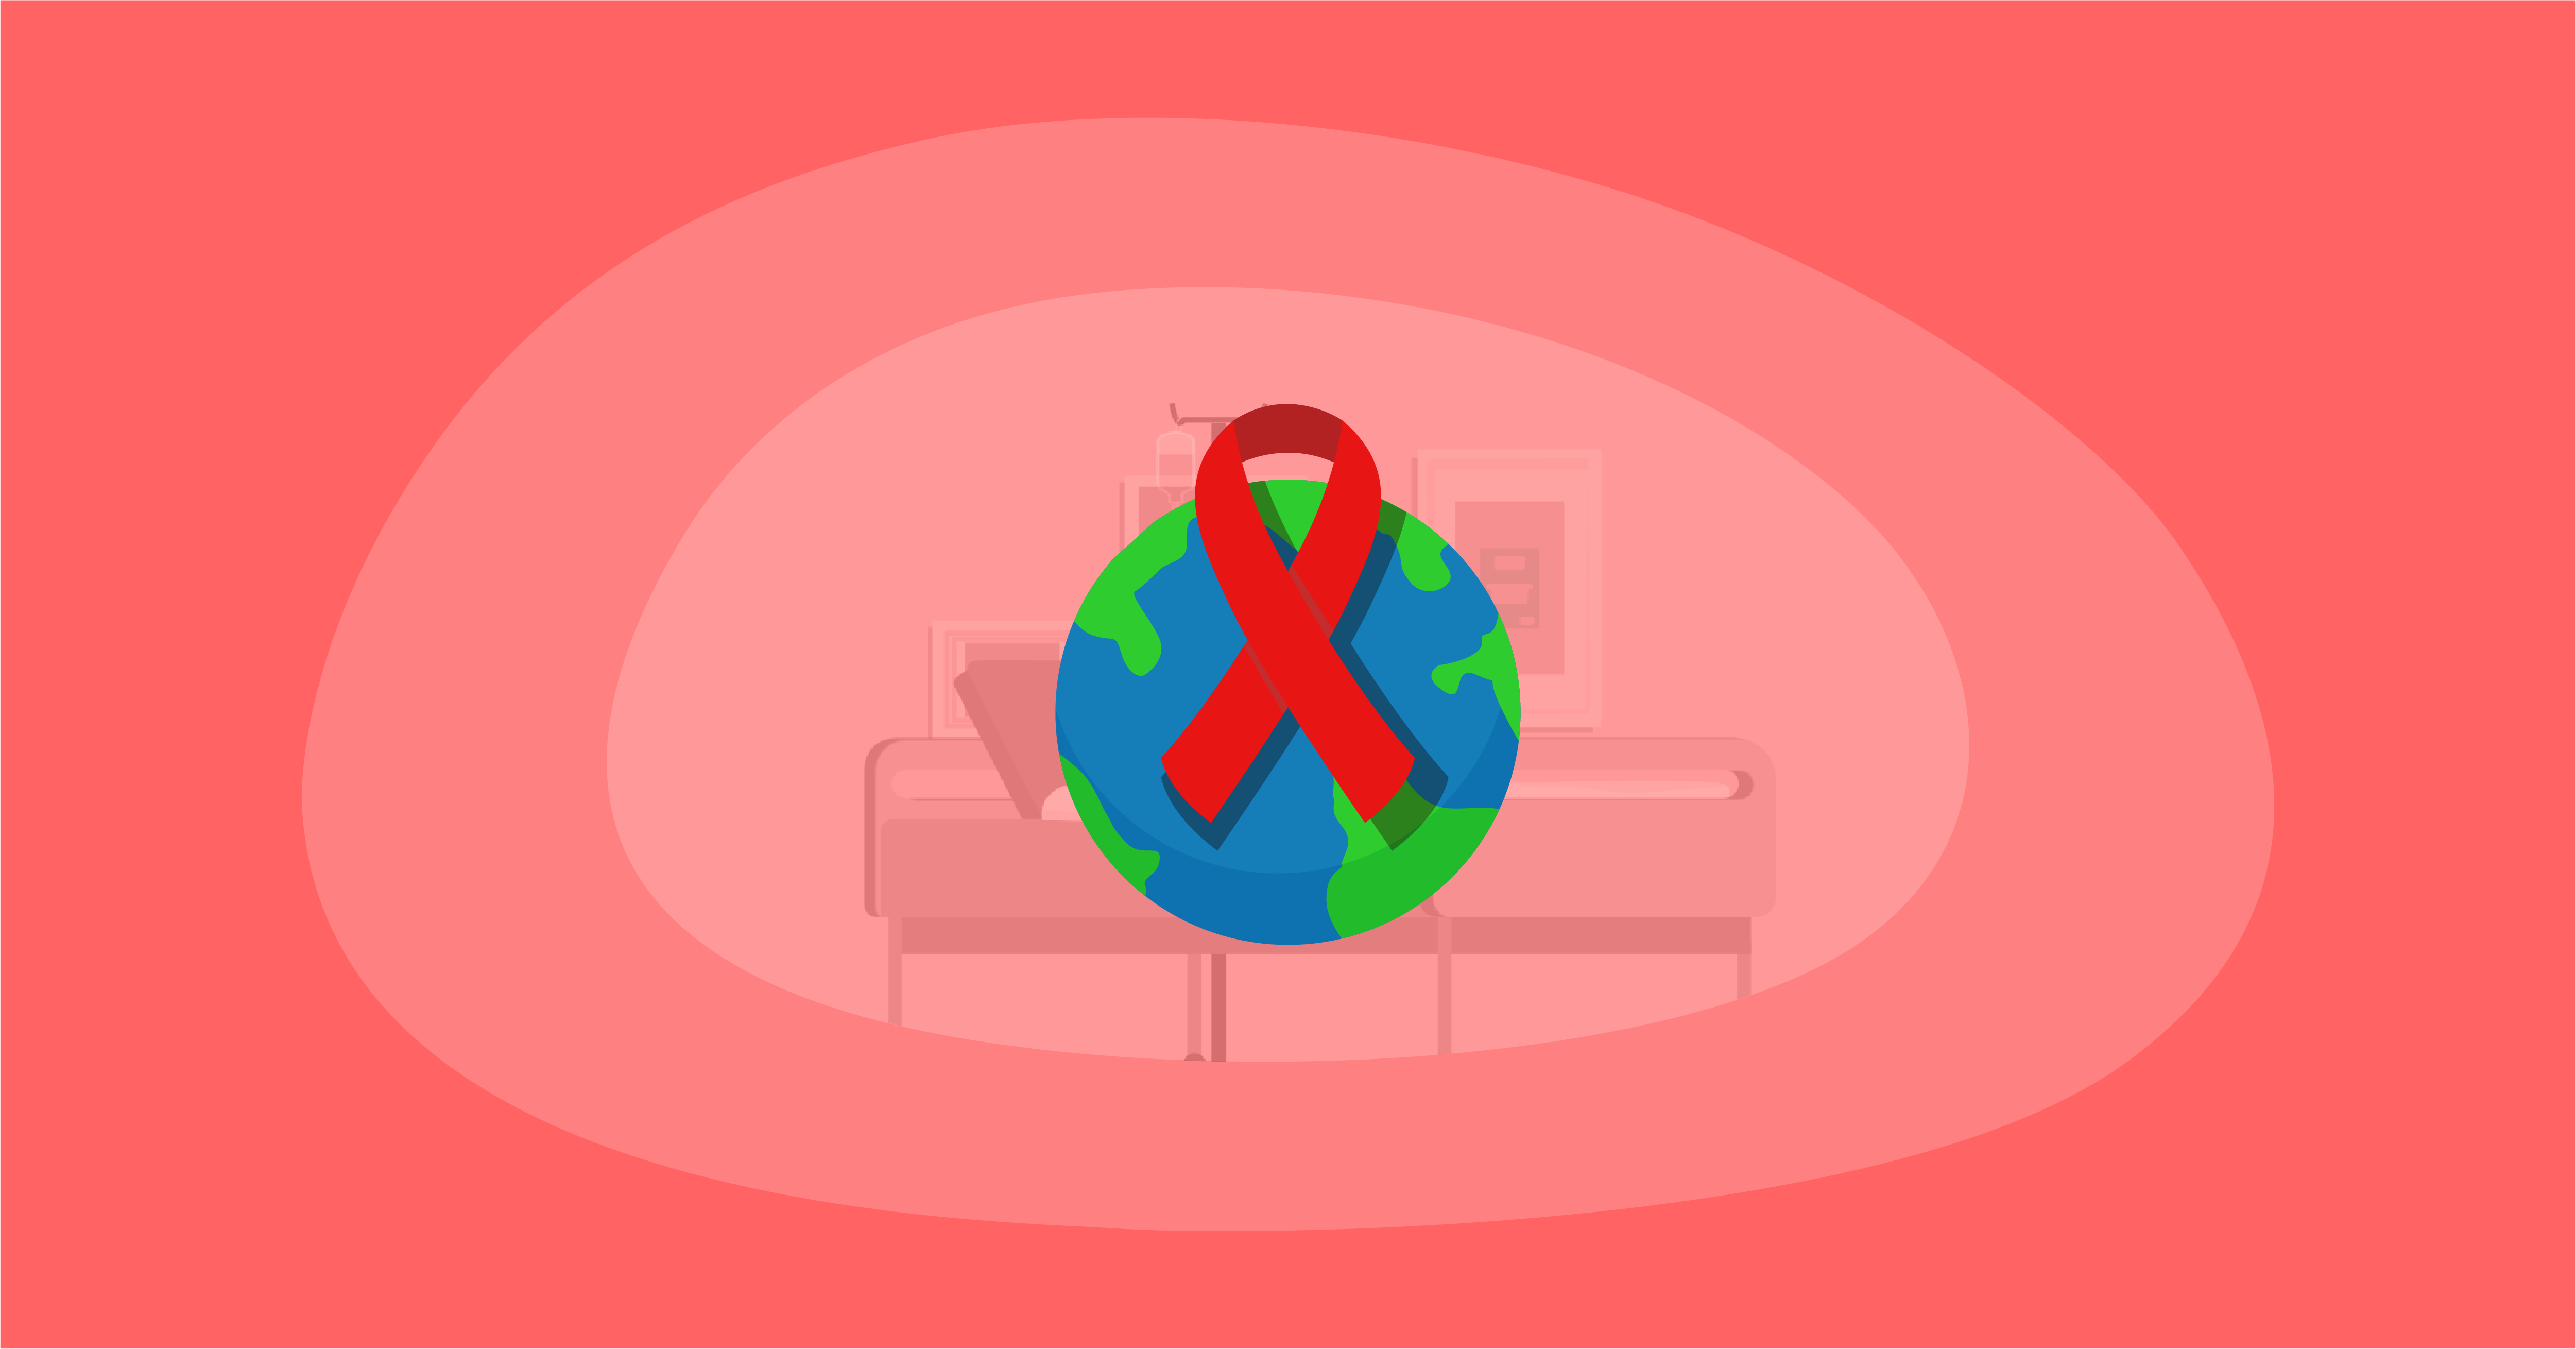 Illustration of the red HIV/AIDS ribbon in front of the world globe